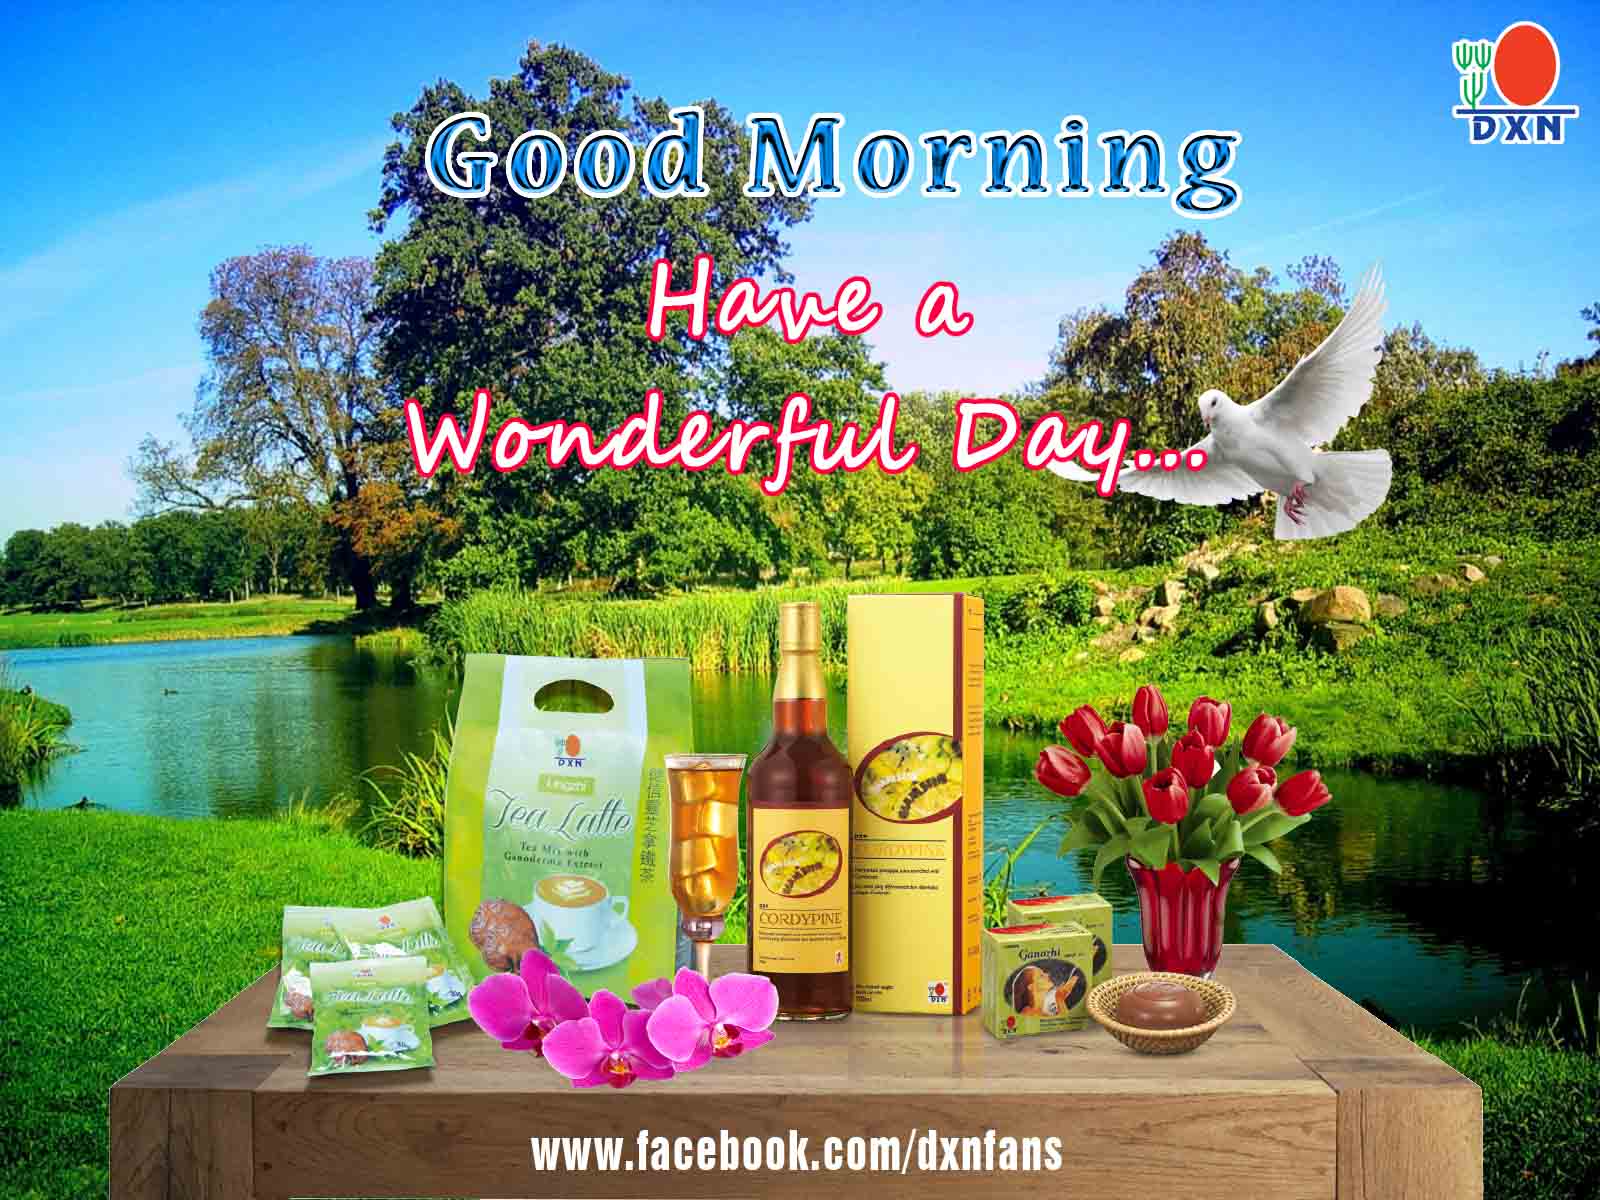 Welcome to the DXN Fans Blog: Good Morning DXN